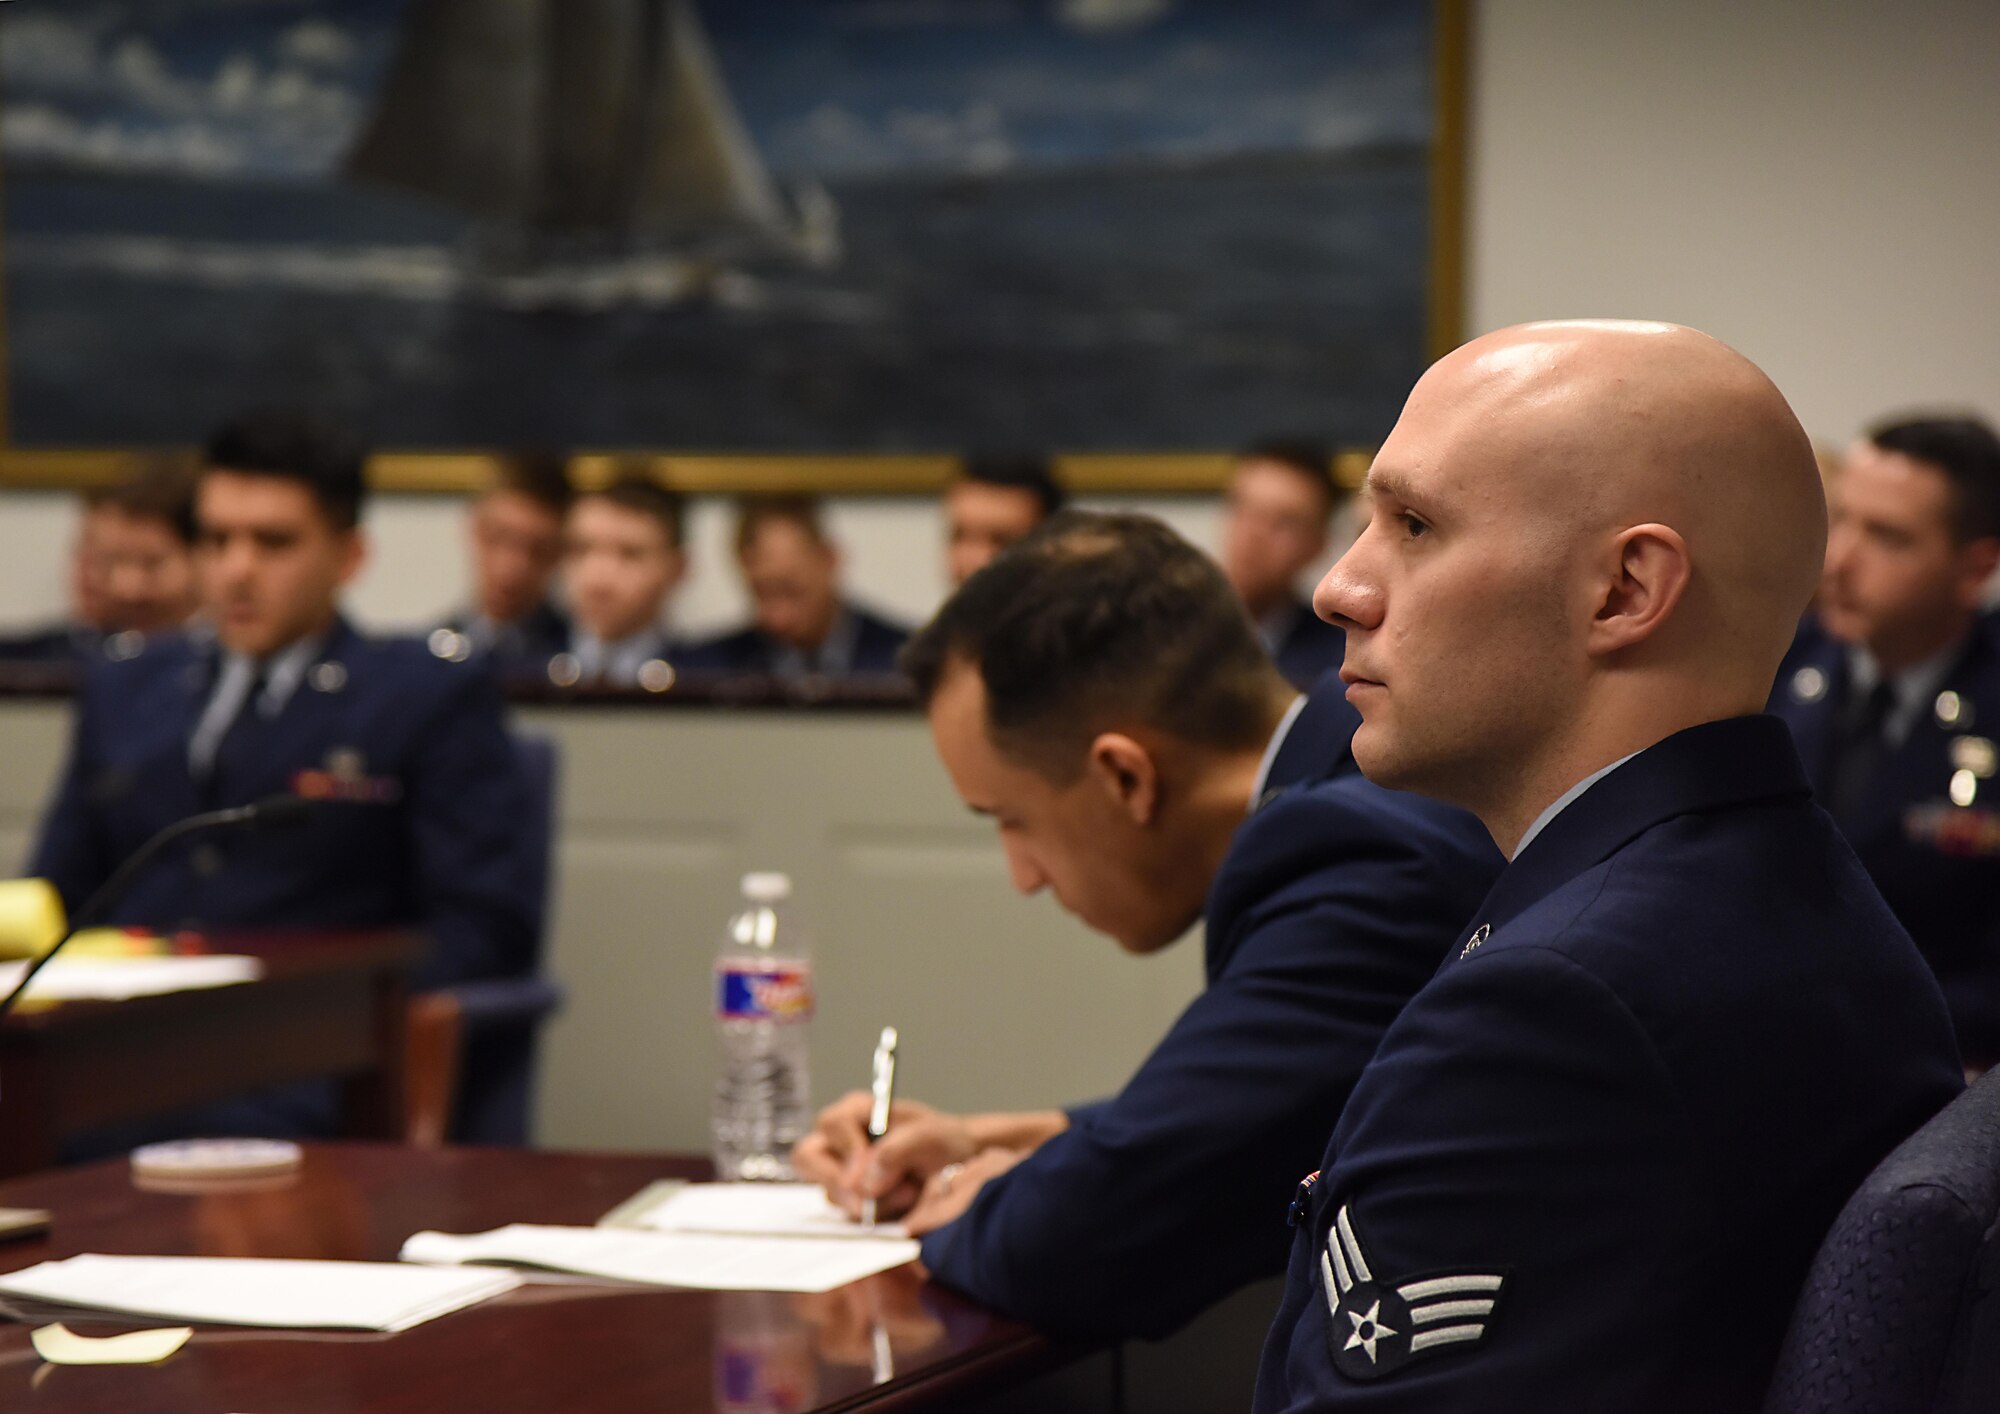 Senior Airman Samuel Stacy, 81st Medical Support Squadron biomedical equipment technician, portrays the “accused” during a mock sexual assault trial held by the 81st Training Wing Legal Office at the Sablich Center March 3, 2017, on Keesler Air Force Base, Miss. The more than 30 Airmen, who served as jurors during the mock trial, were able to learn about military justice system. (U.S. Air Force photo by Kemberly Groue)
Participate
